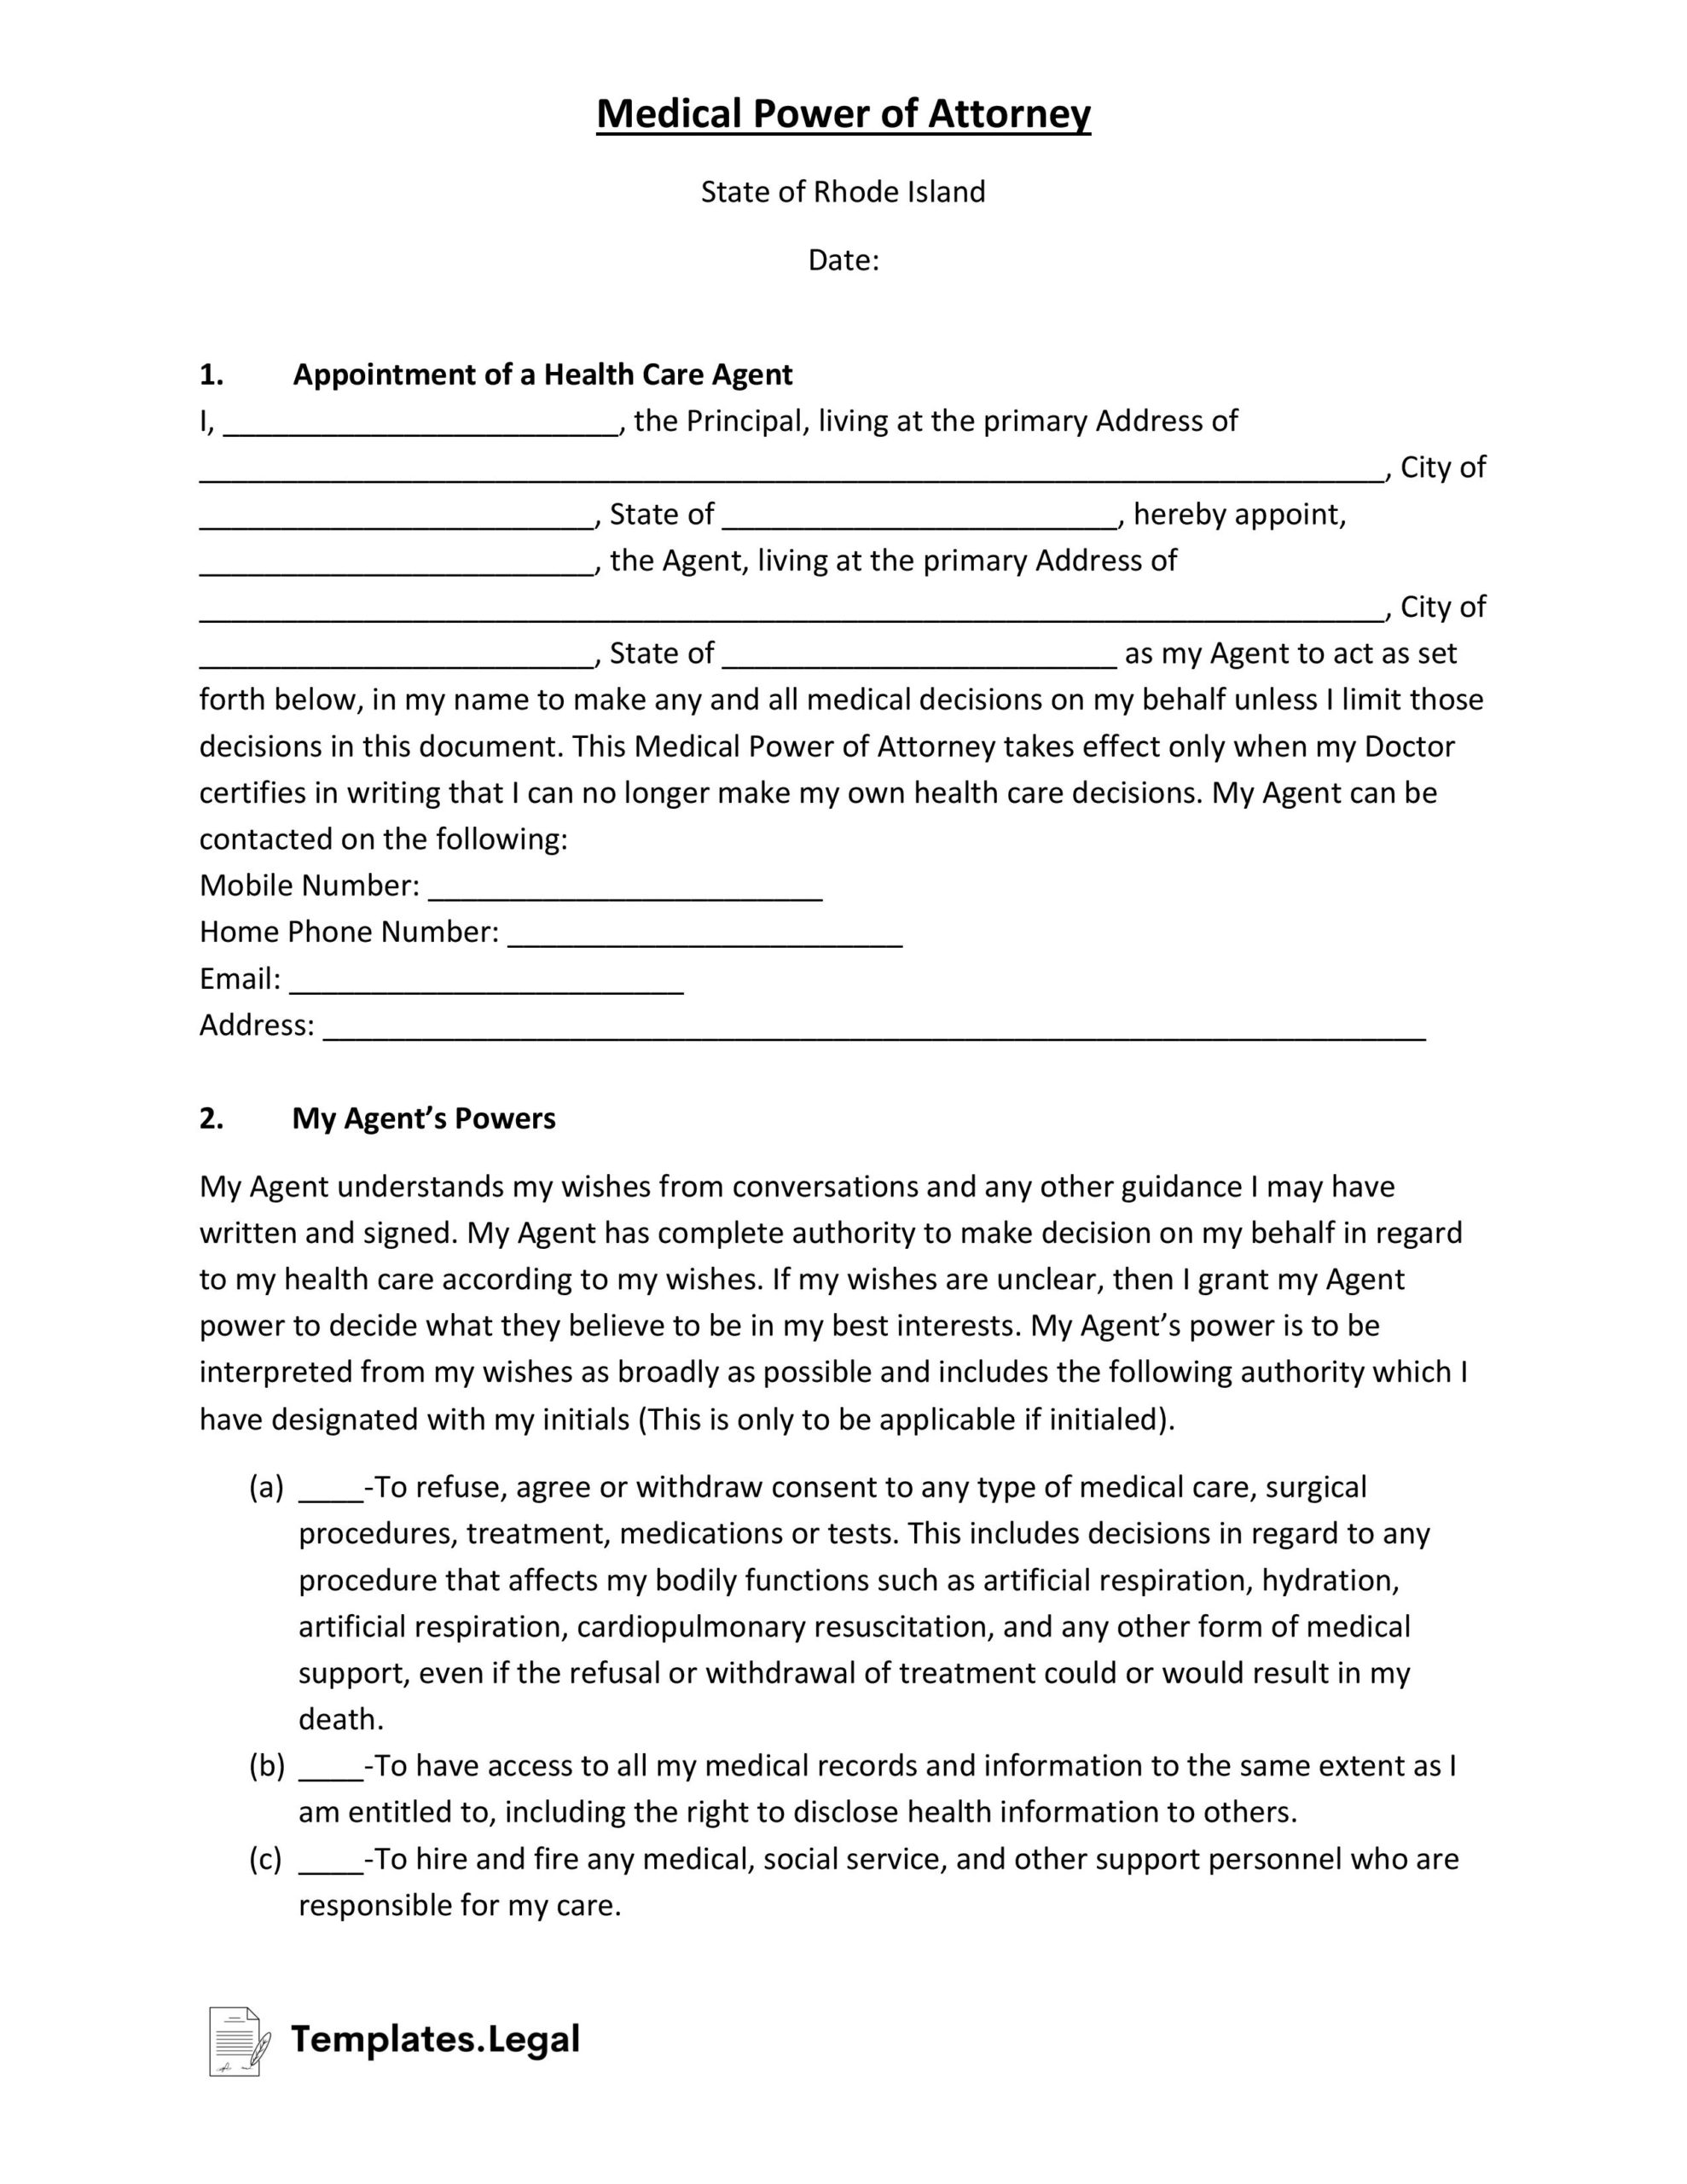 Rhode Island Medical Power of Attorney- Templates.Legal